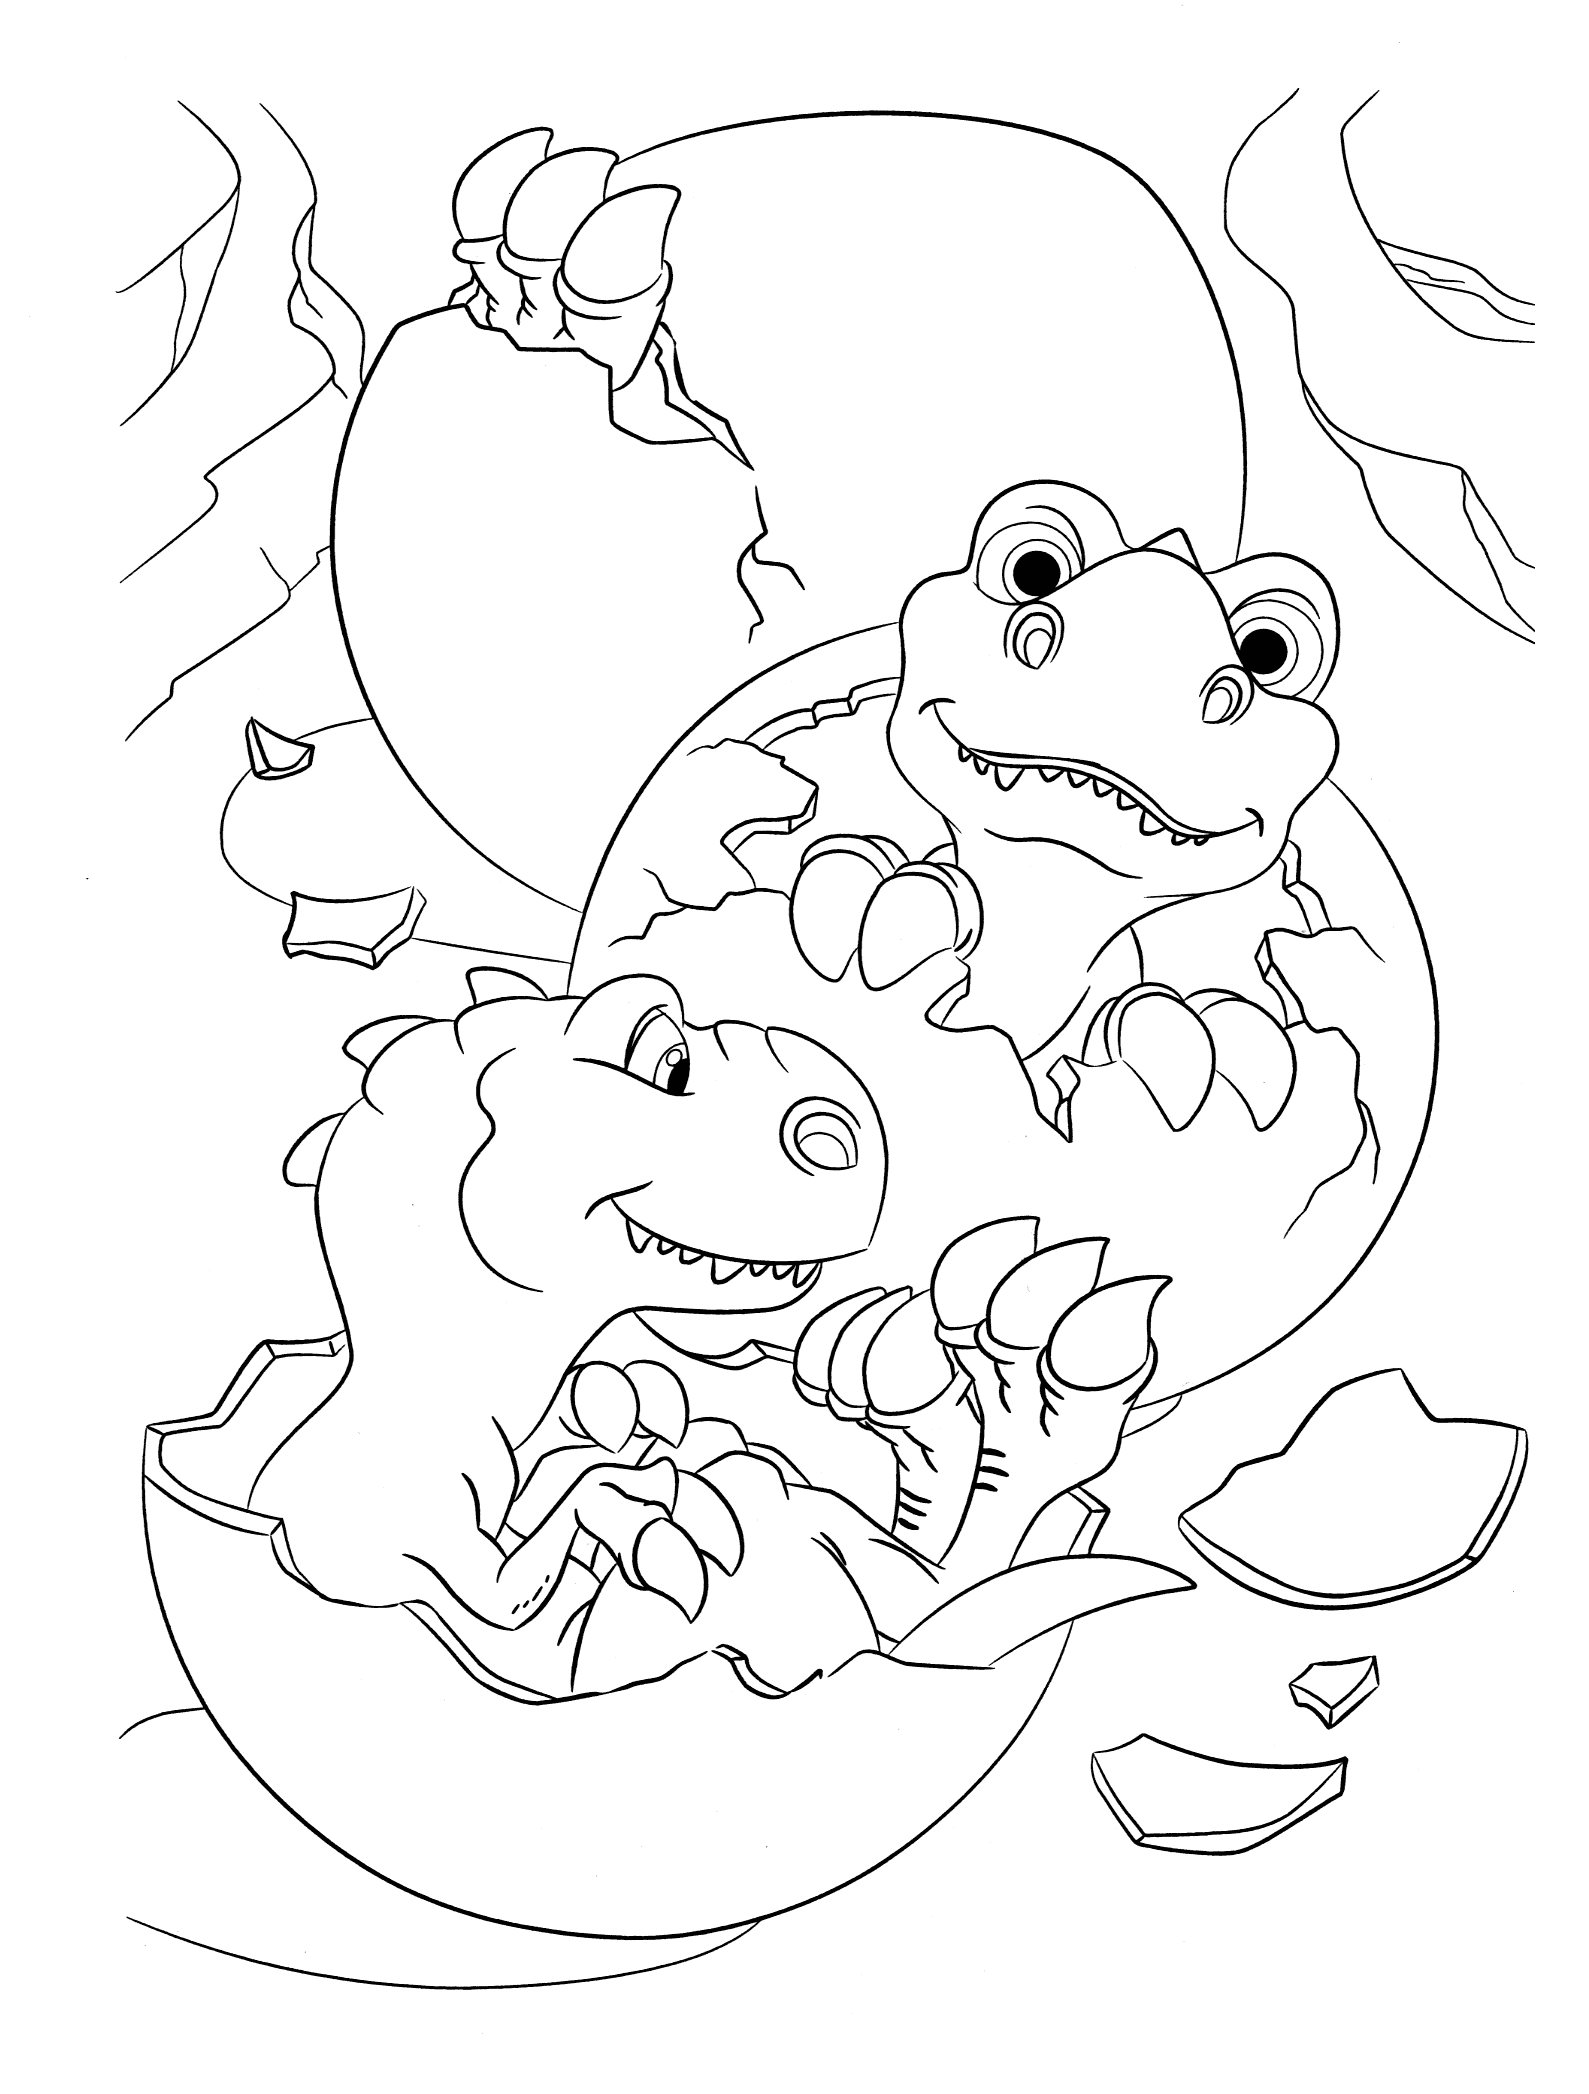 Coloring page - Dinosaur babies hatch